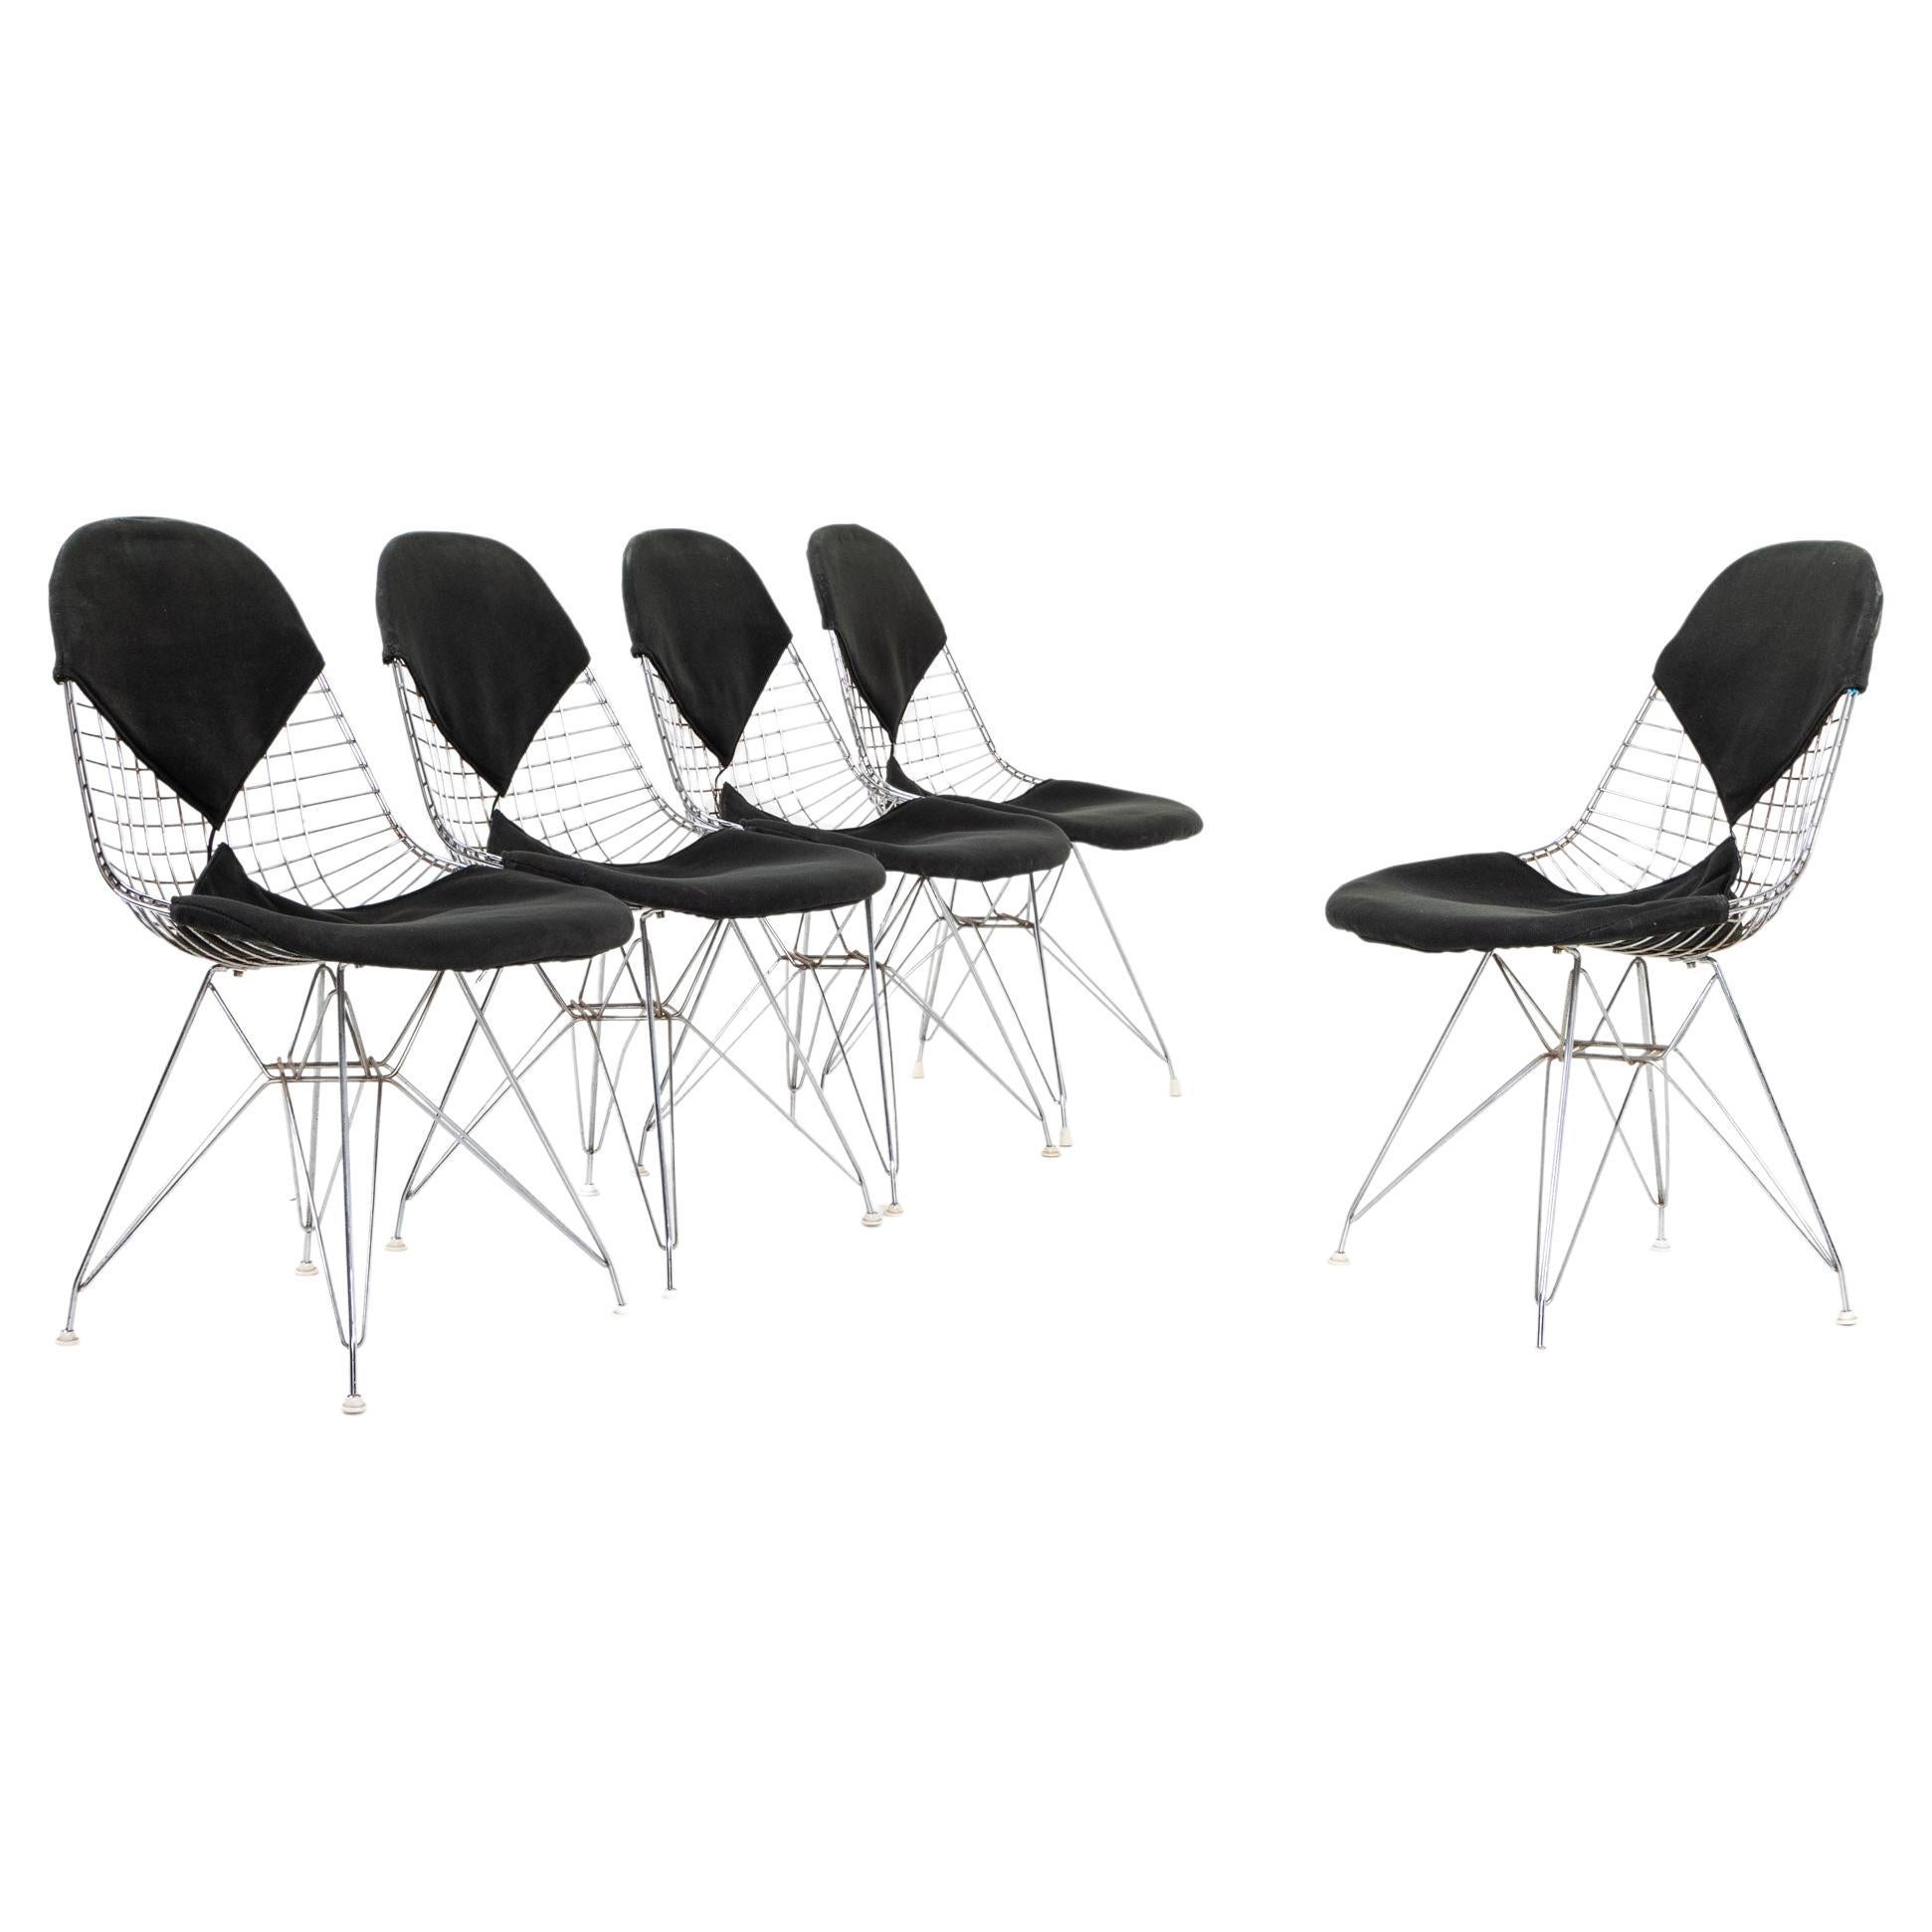 Eames Wire Bikini Chair DKR-2 with Black Cover, Design 1951 For Sale